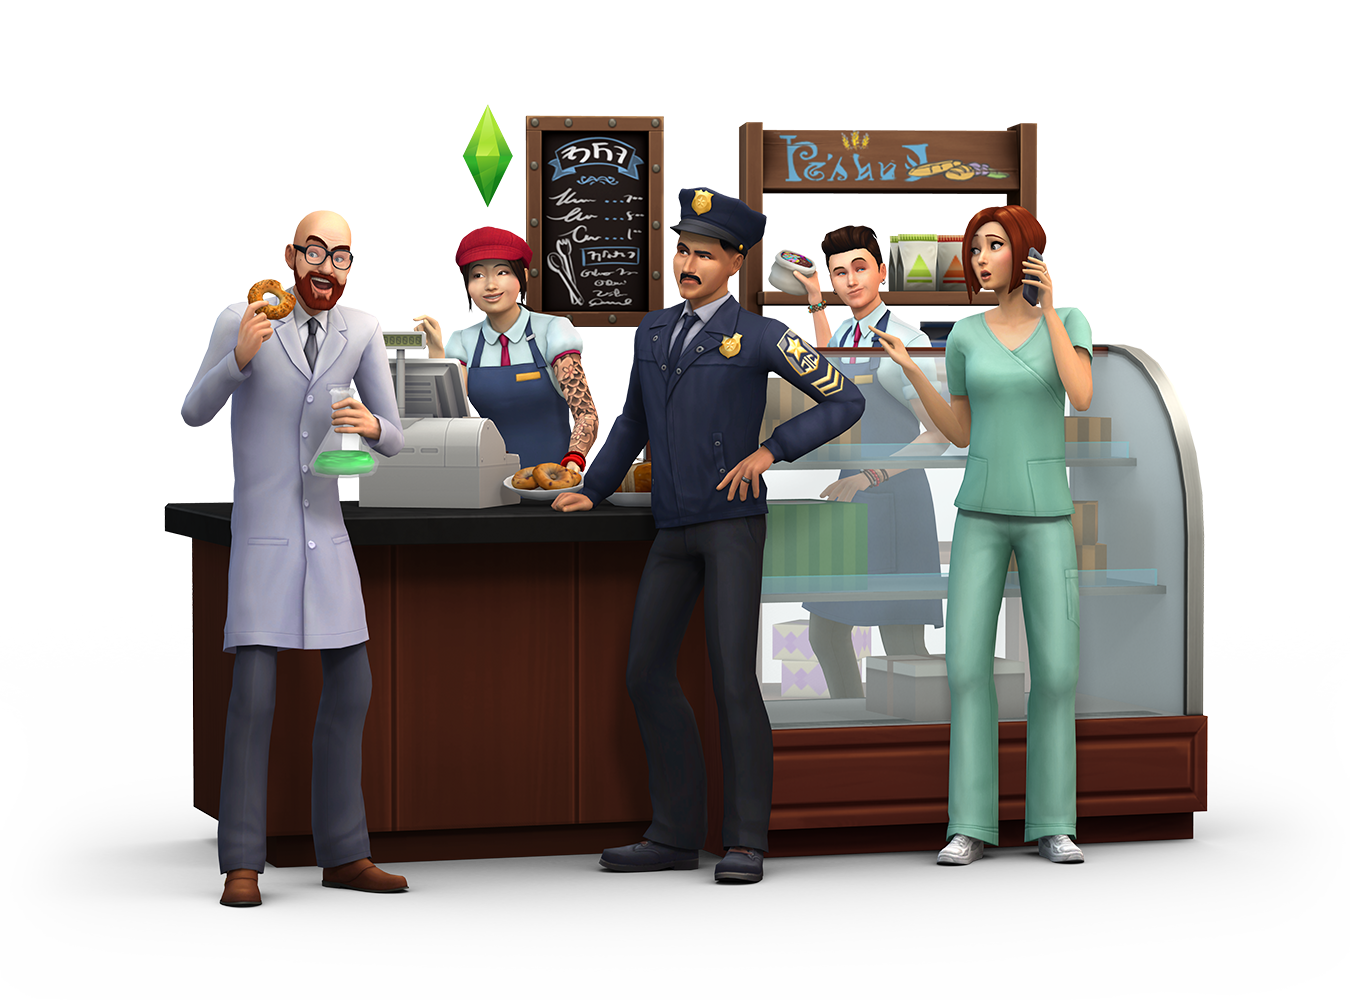 the sims 4 get to work managing